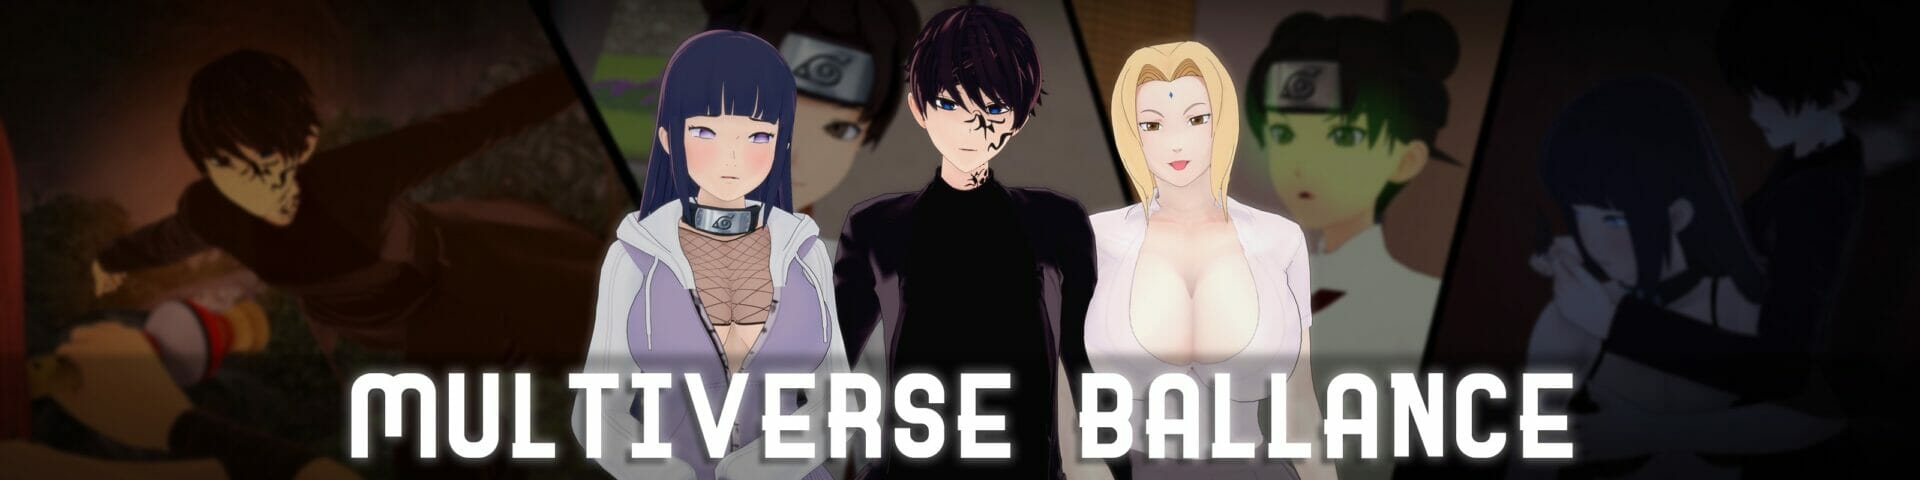 Multiverse Ballance Adult Hentai Game Android Apk Download (1)